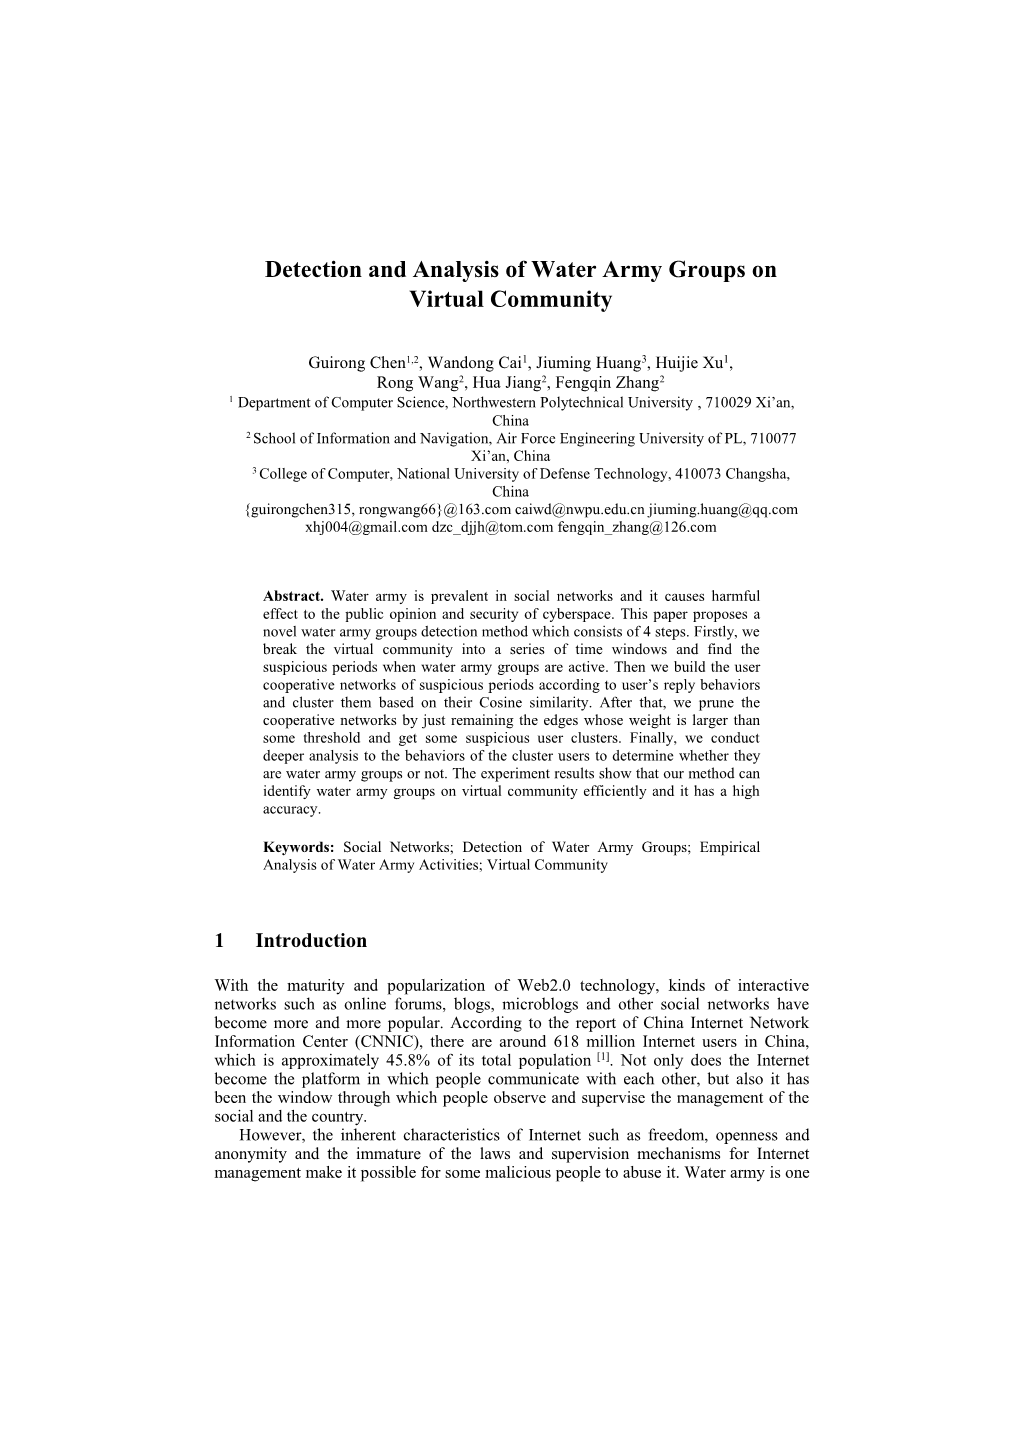 Detection and Analysis of Water Army Groups on Virtual Community